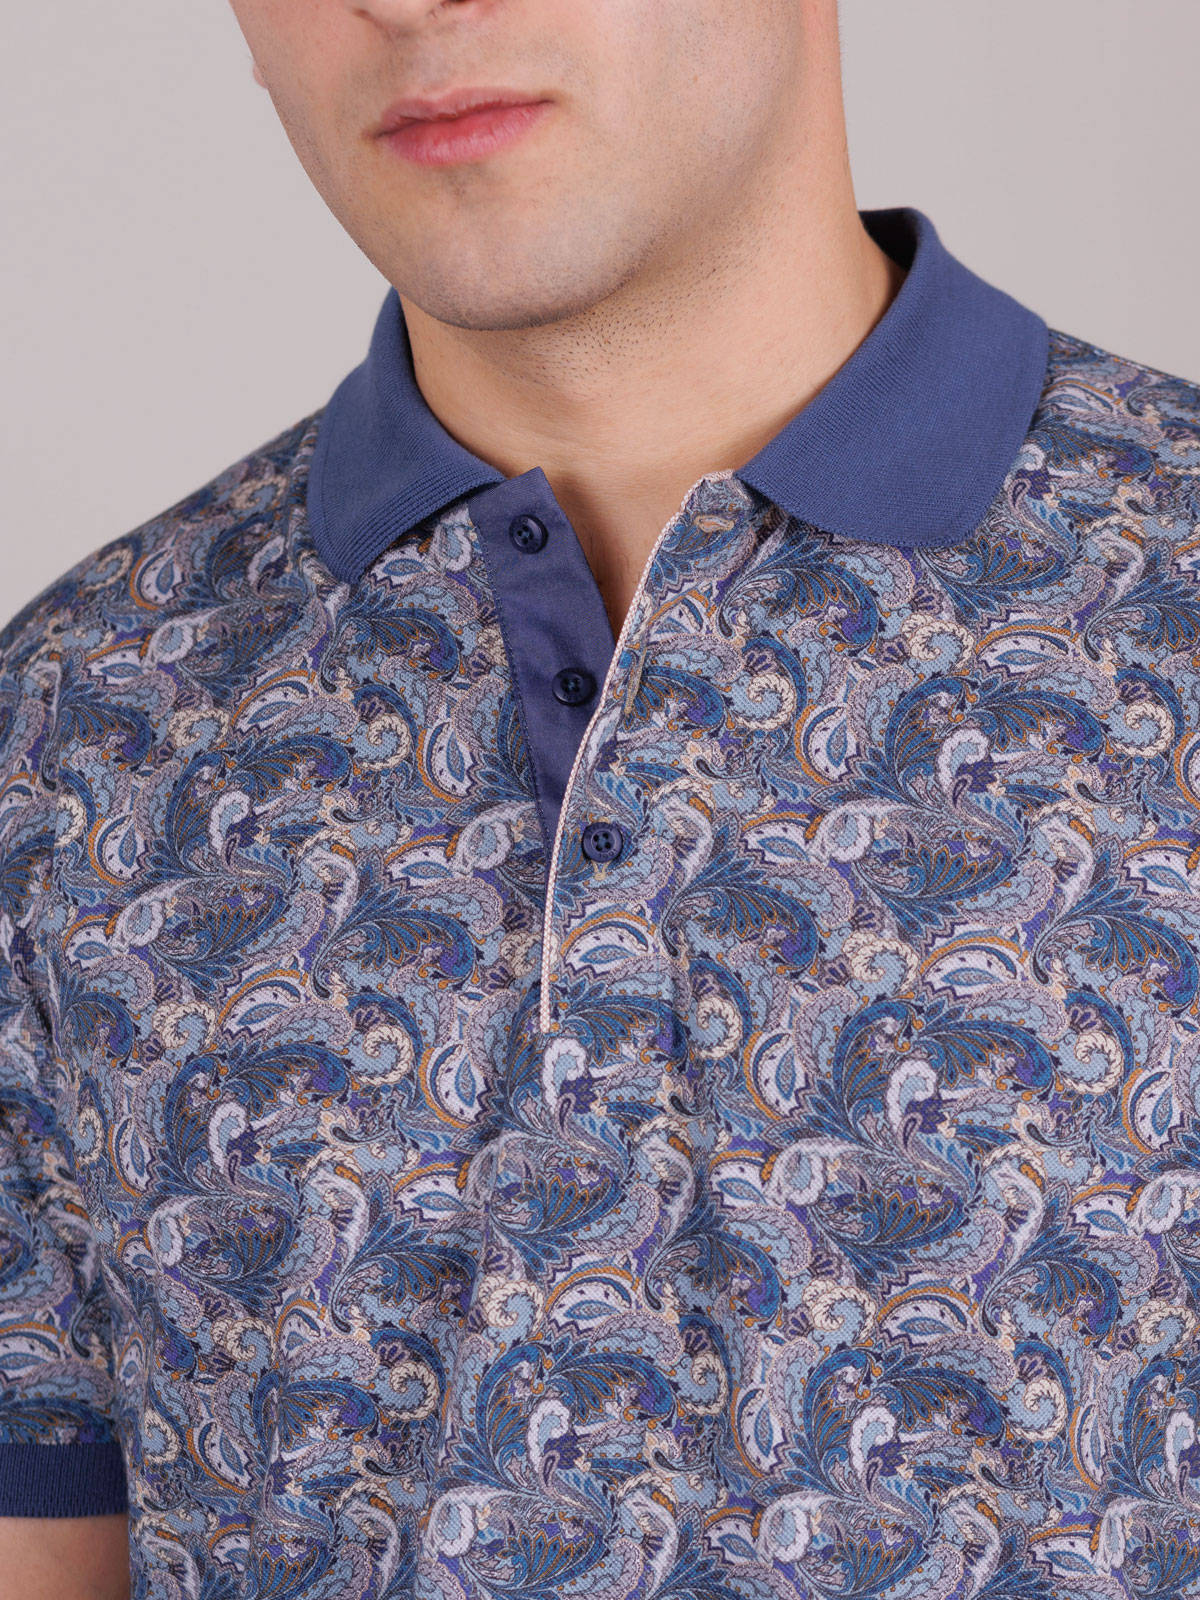 Tshirt in blue with paisley print - 93426 € 40.49 img3